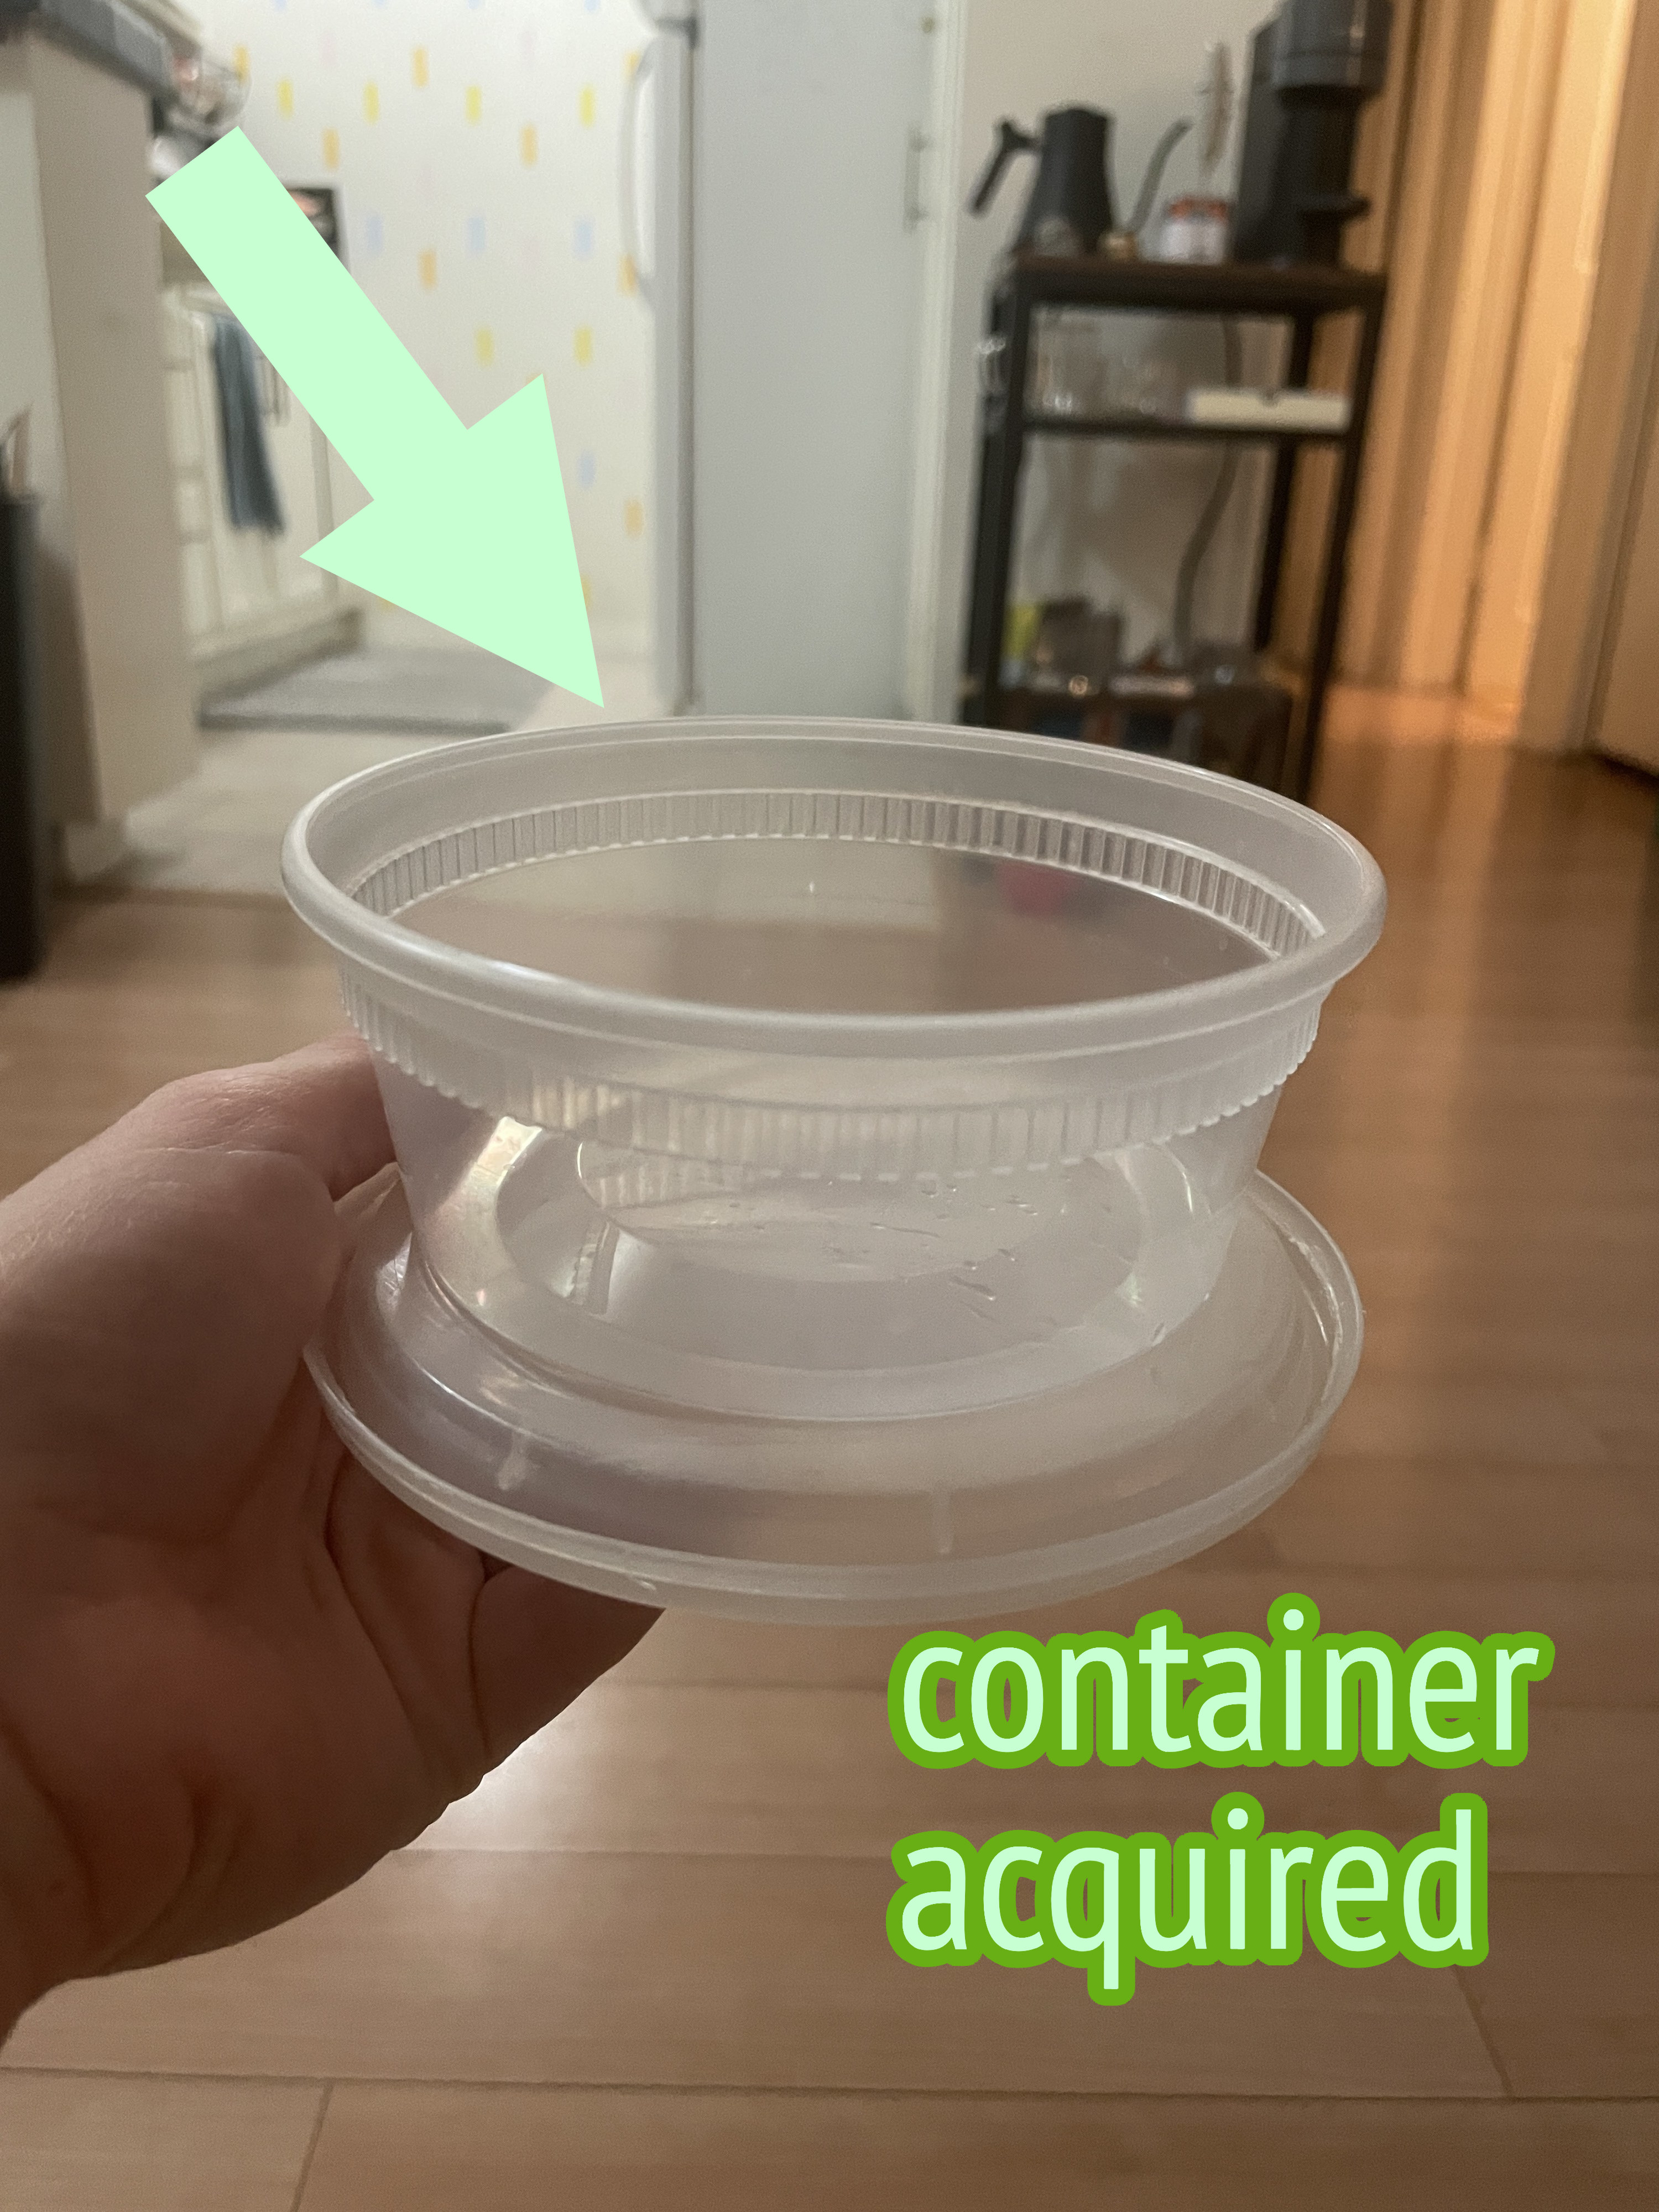 Arrow pointing to plastic container in someone&#x27;s hand, with text &quot;container acquired&quot;